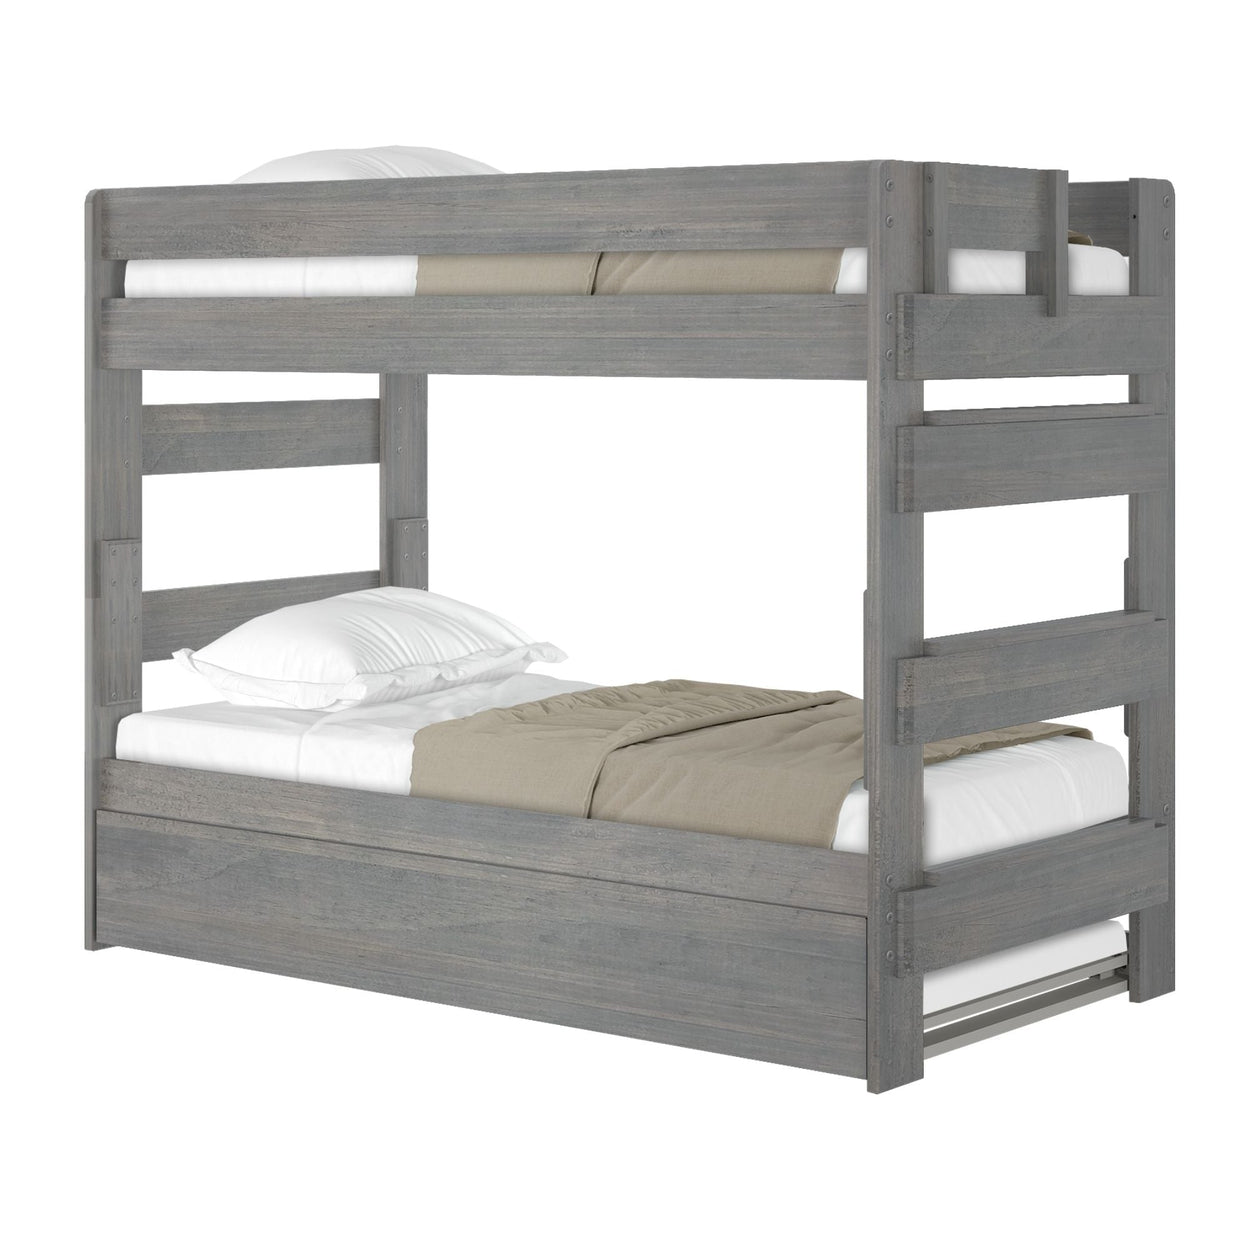 Rustic Twin over Twin Bunk Bed + Trundle Bunk Beds Plank+Beam 